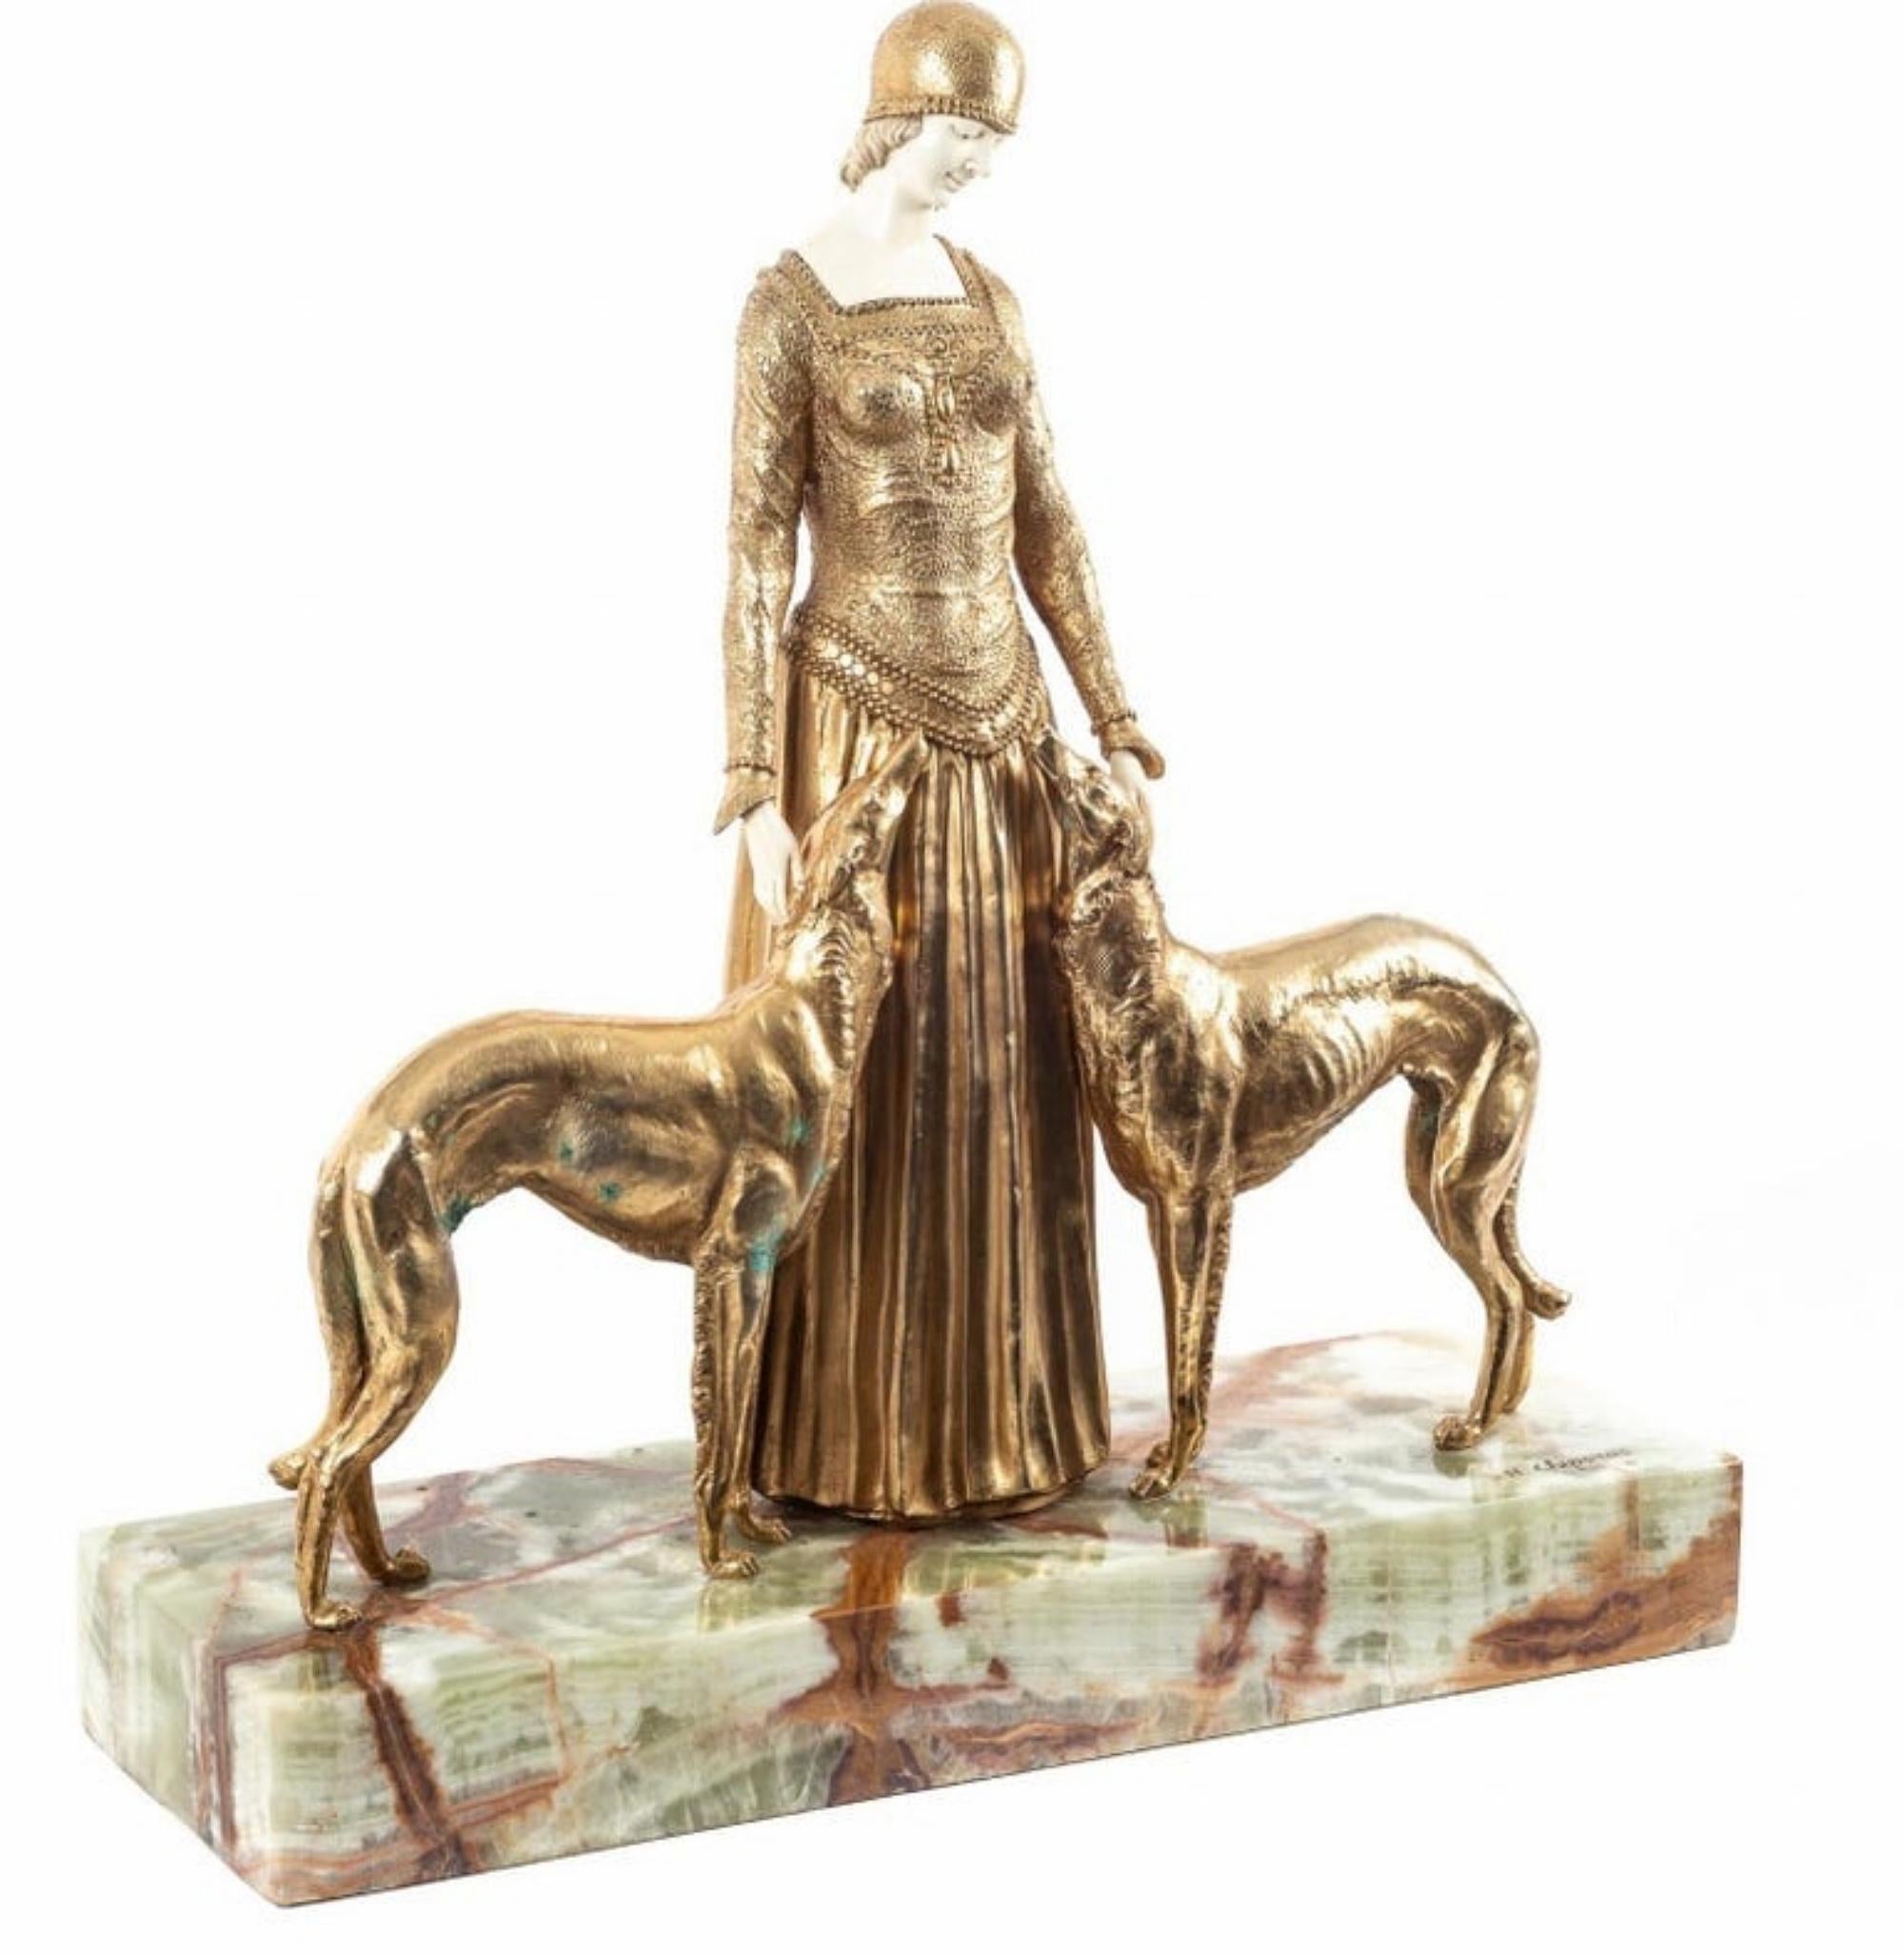 European school, fles. from the 20th century.
Friends forever.
Art Deco style chryselephantine sculpture in bronze and ivory after model by D.H. Chiparus ( signed) on agate base.
Attach Cites certificate.
Measures: 63 x 59 x 20 cm.
very good